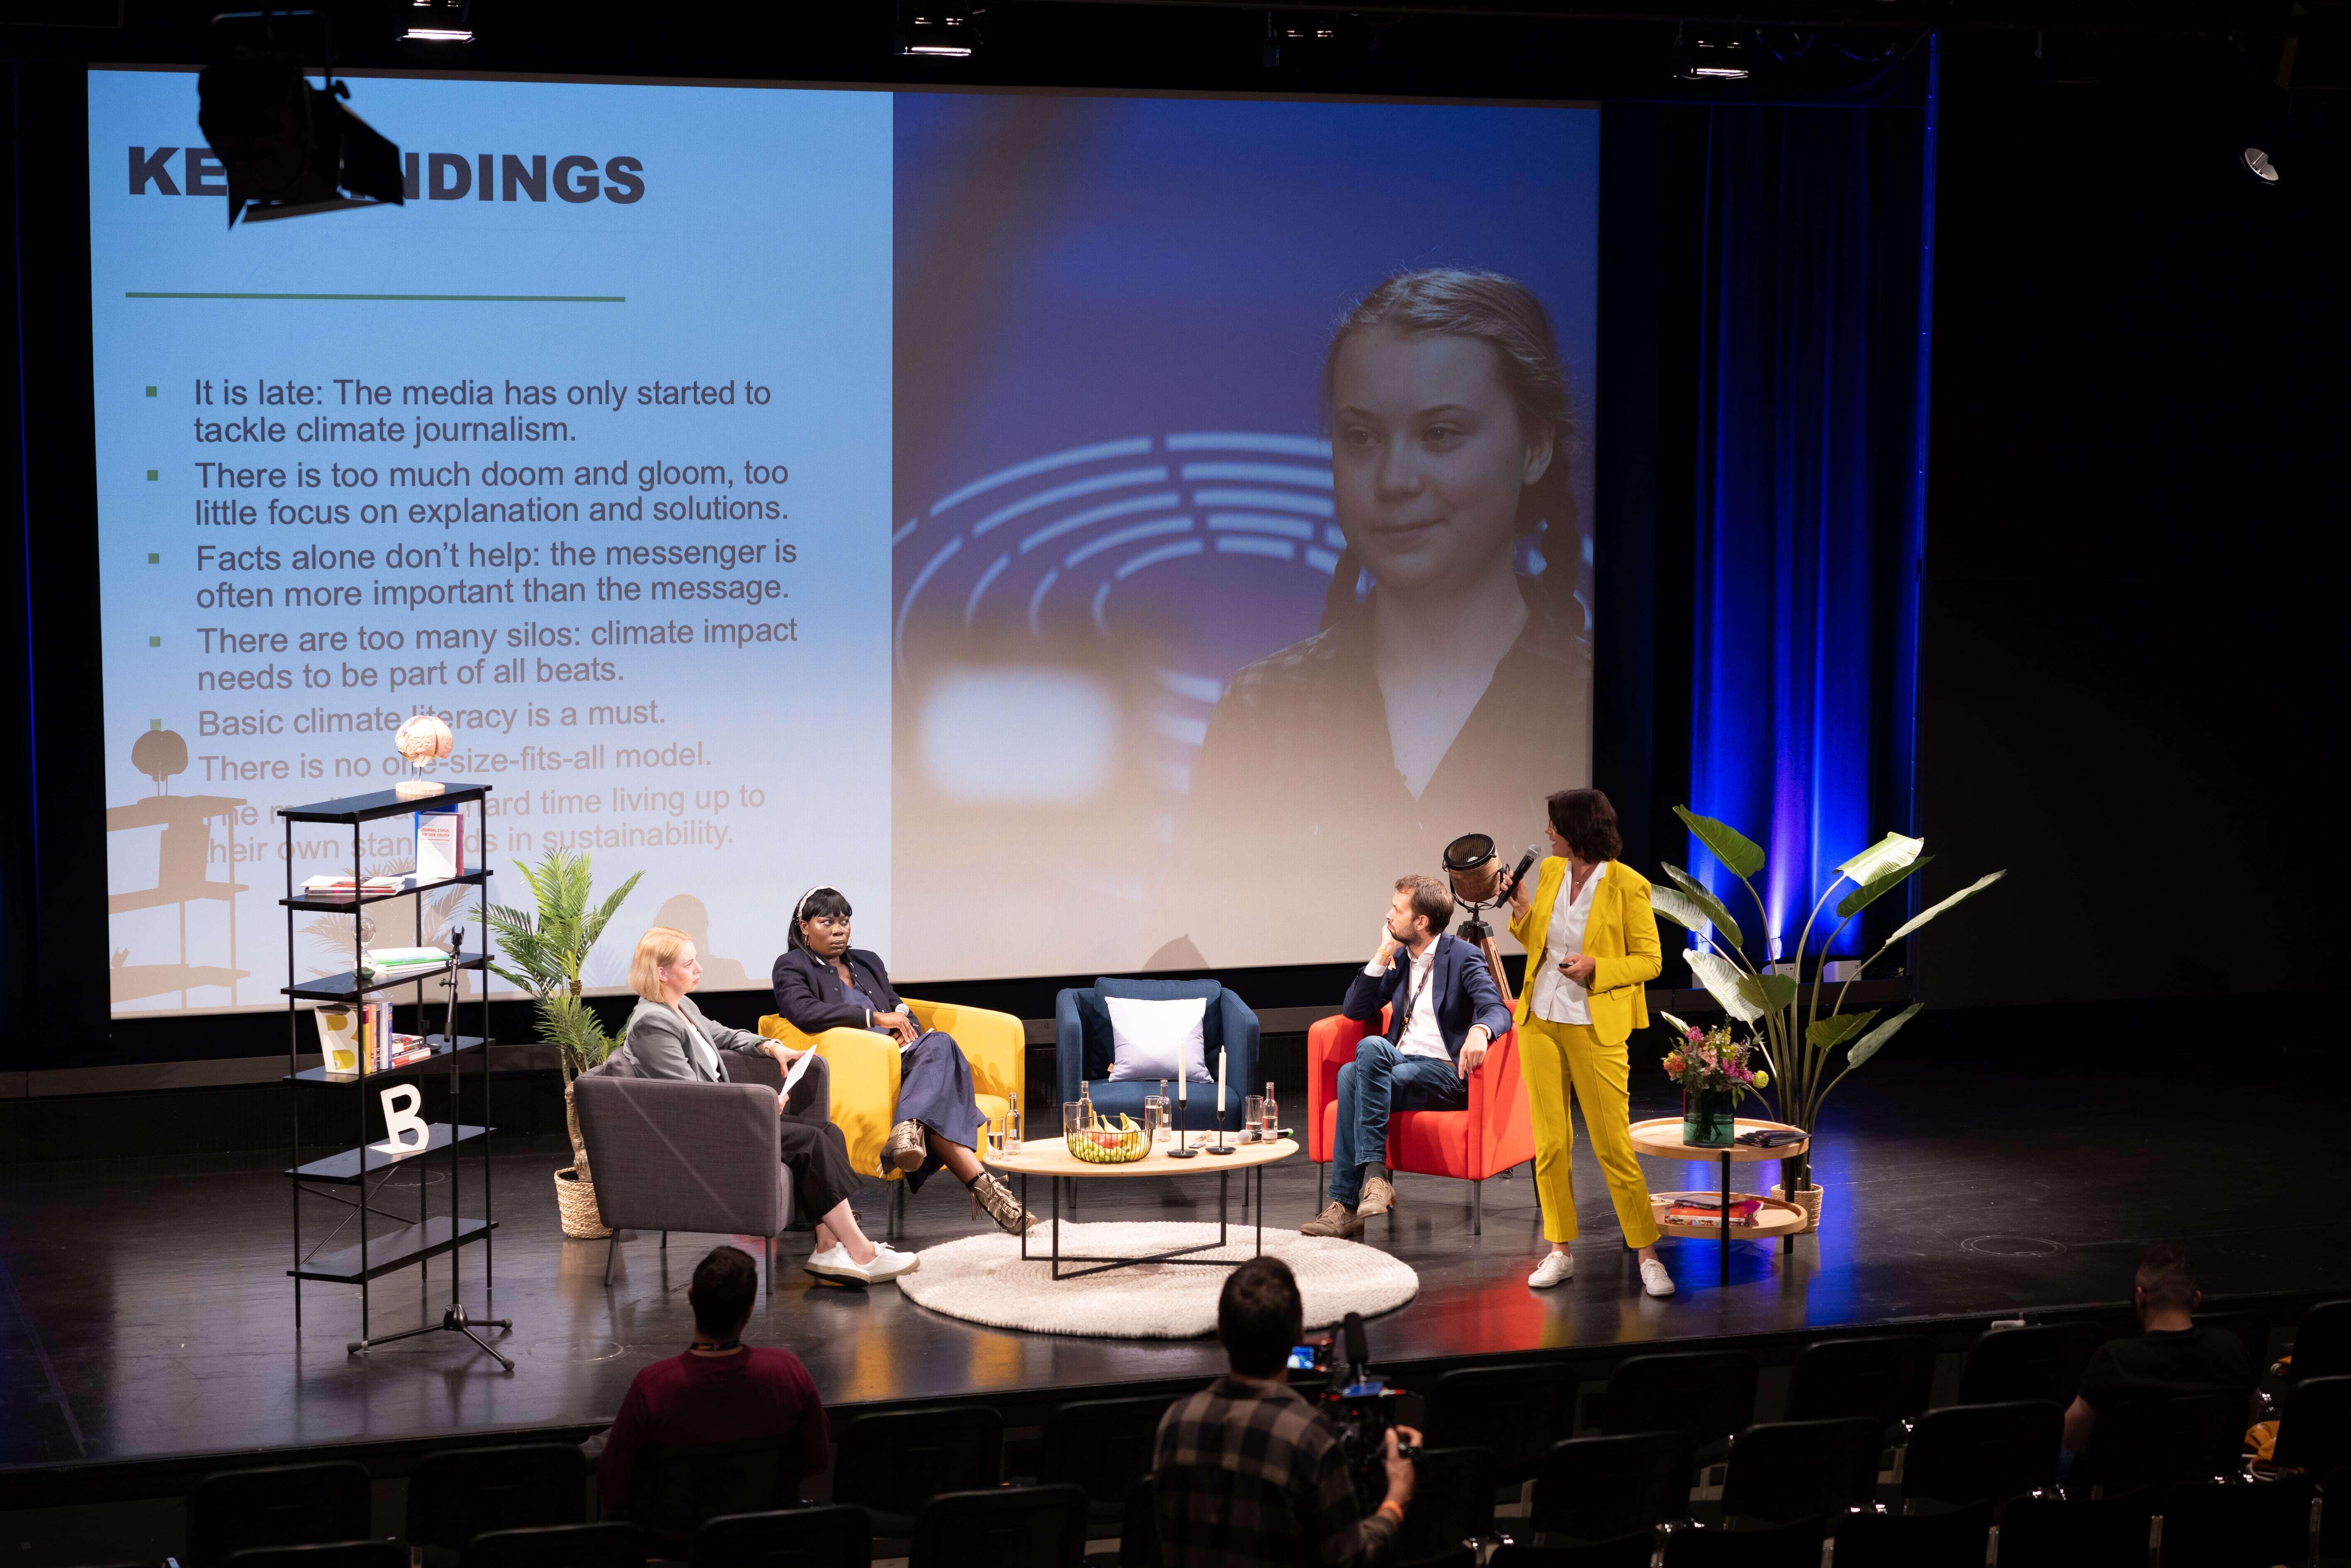 Alexandra Borchardt is giving a presentation; on the screen, there is an image of Greta Thunberg and the words "Key Findings." Lisa Urlbauer, Ruona Meyer, and Peter Schniering are sitting in chairs around her, listening